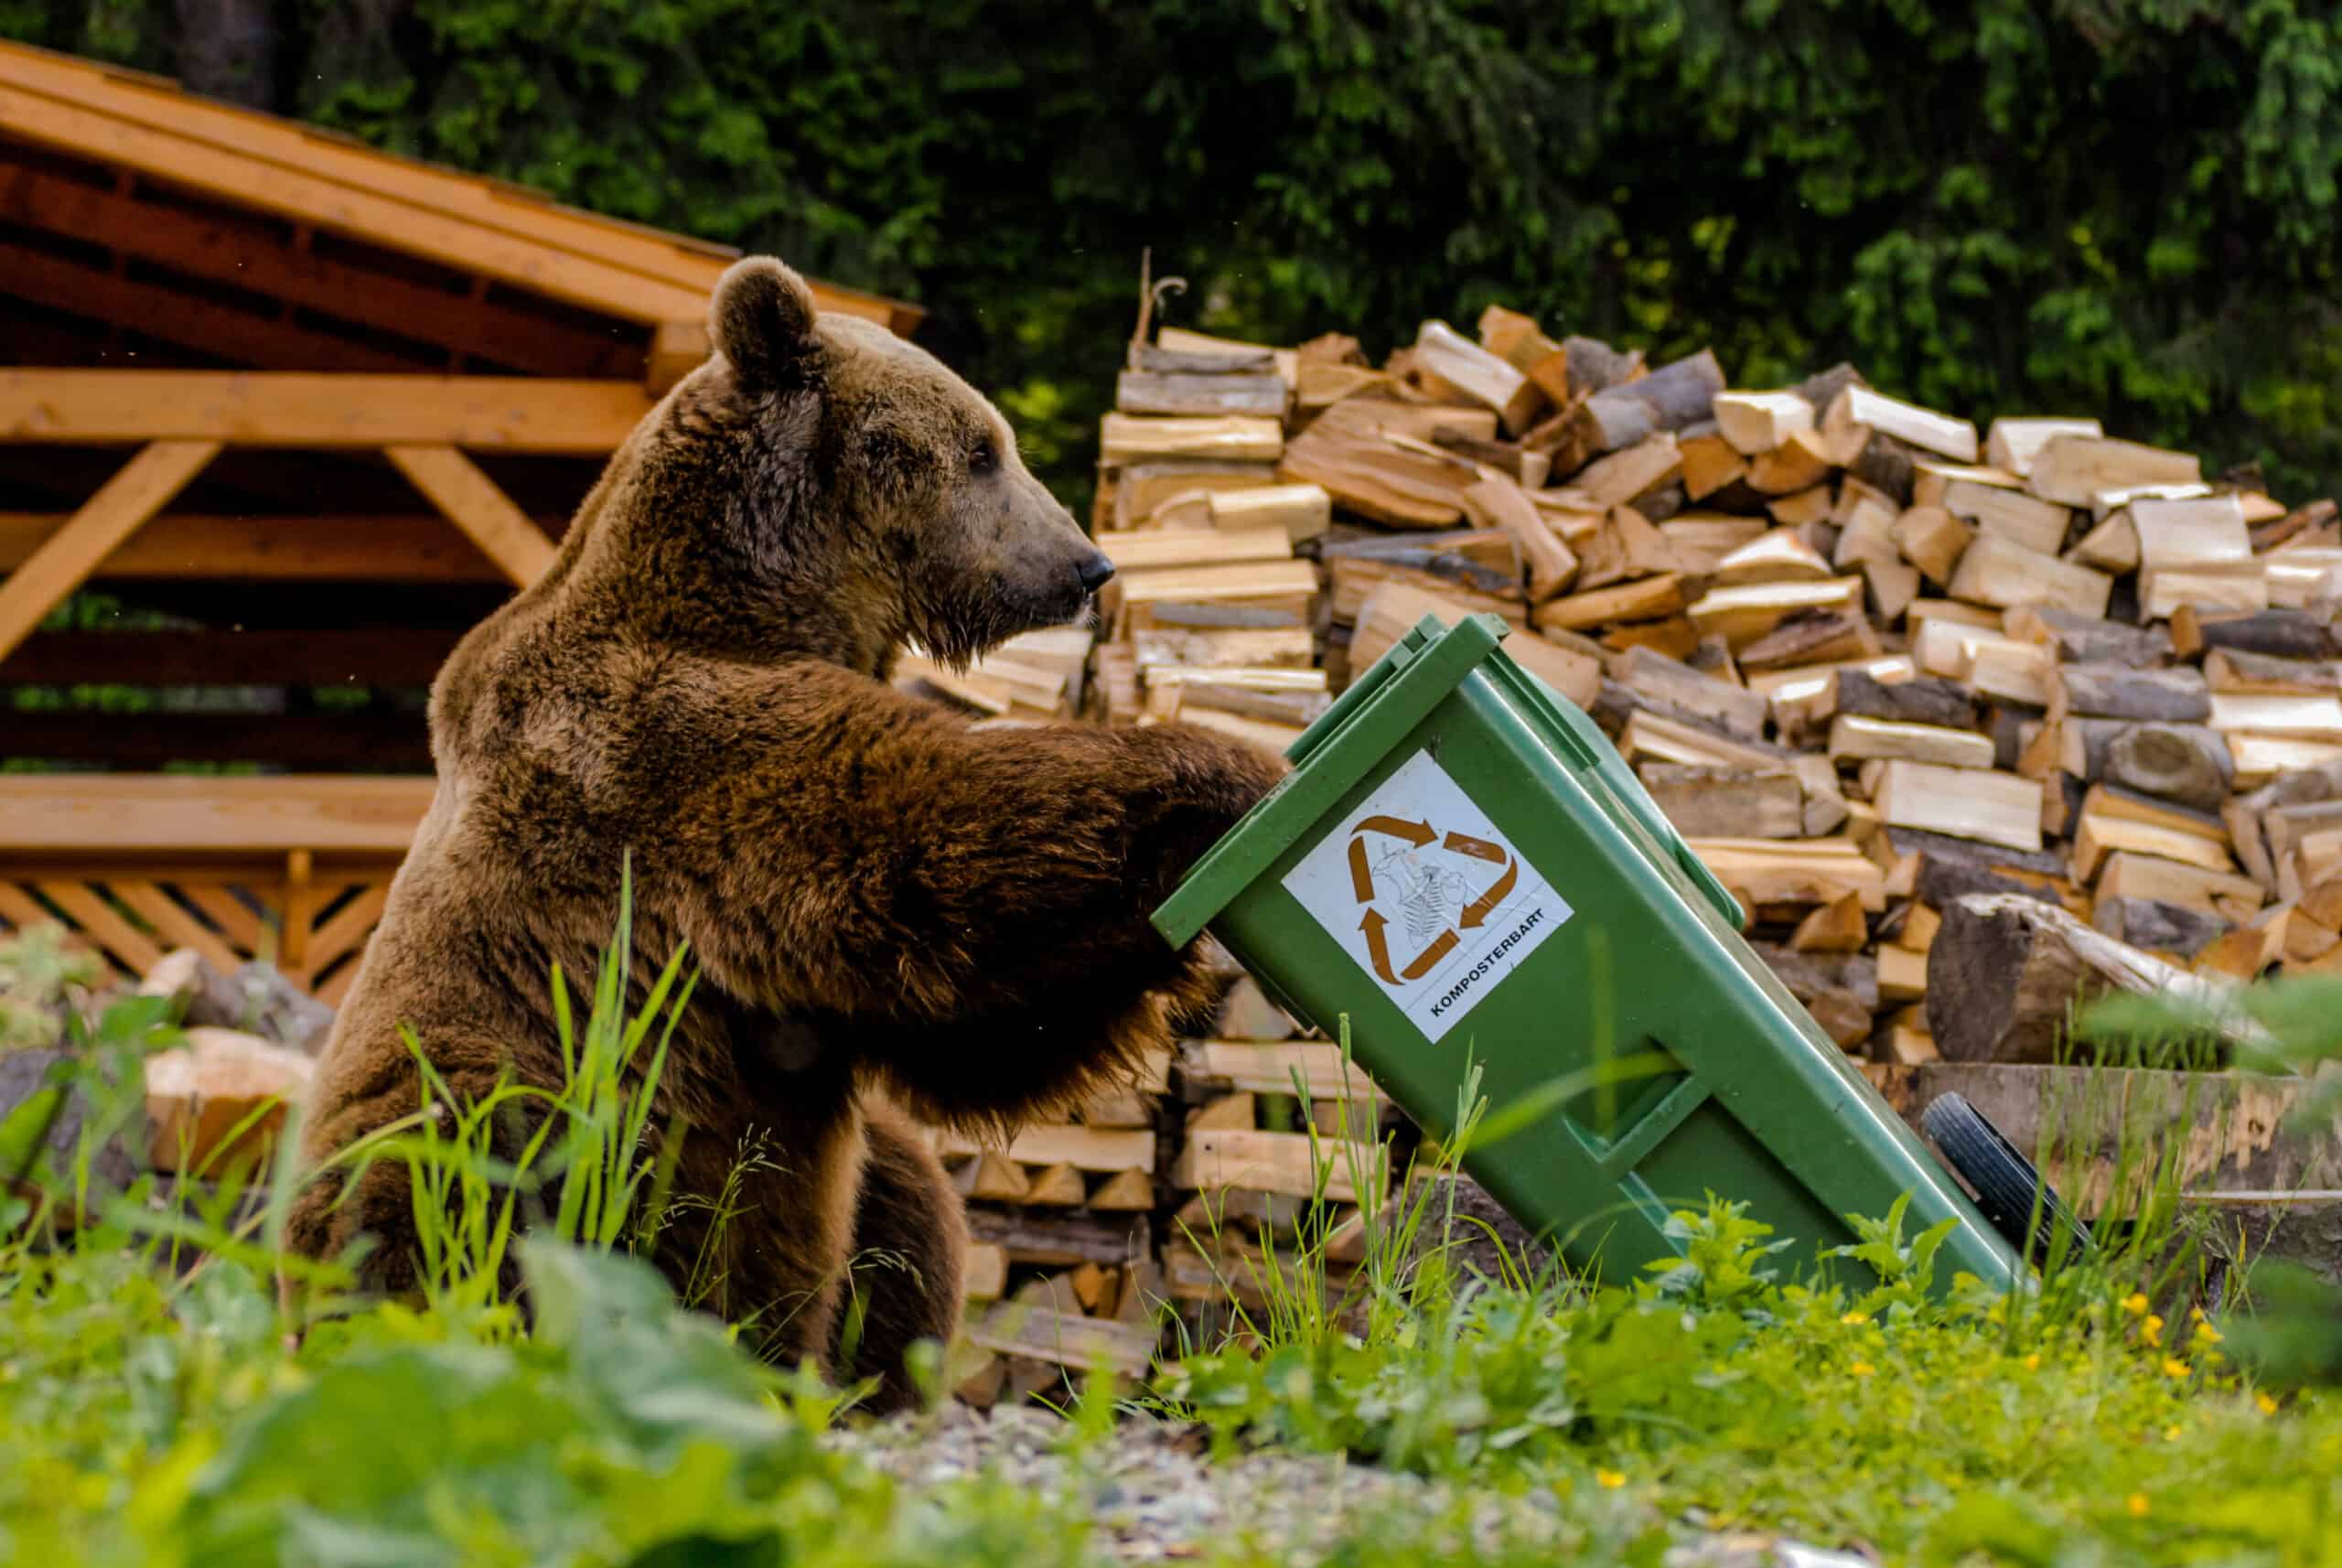 A bear digs into a trashcan outside of a cabin